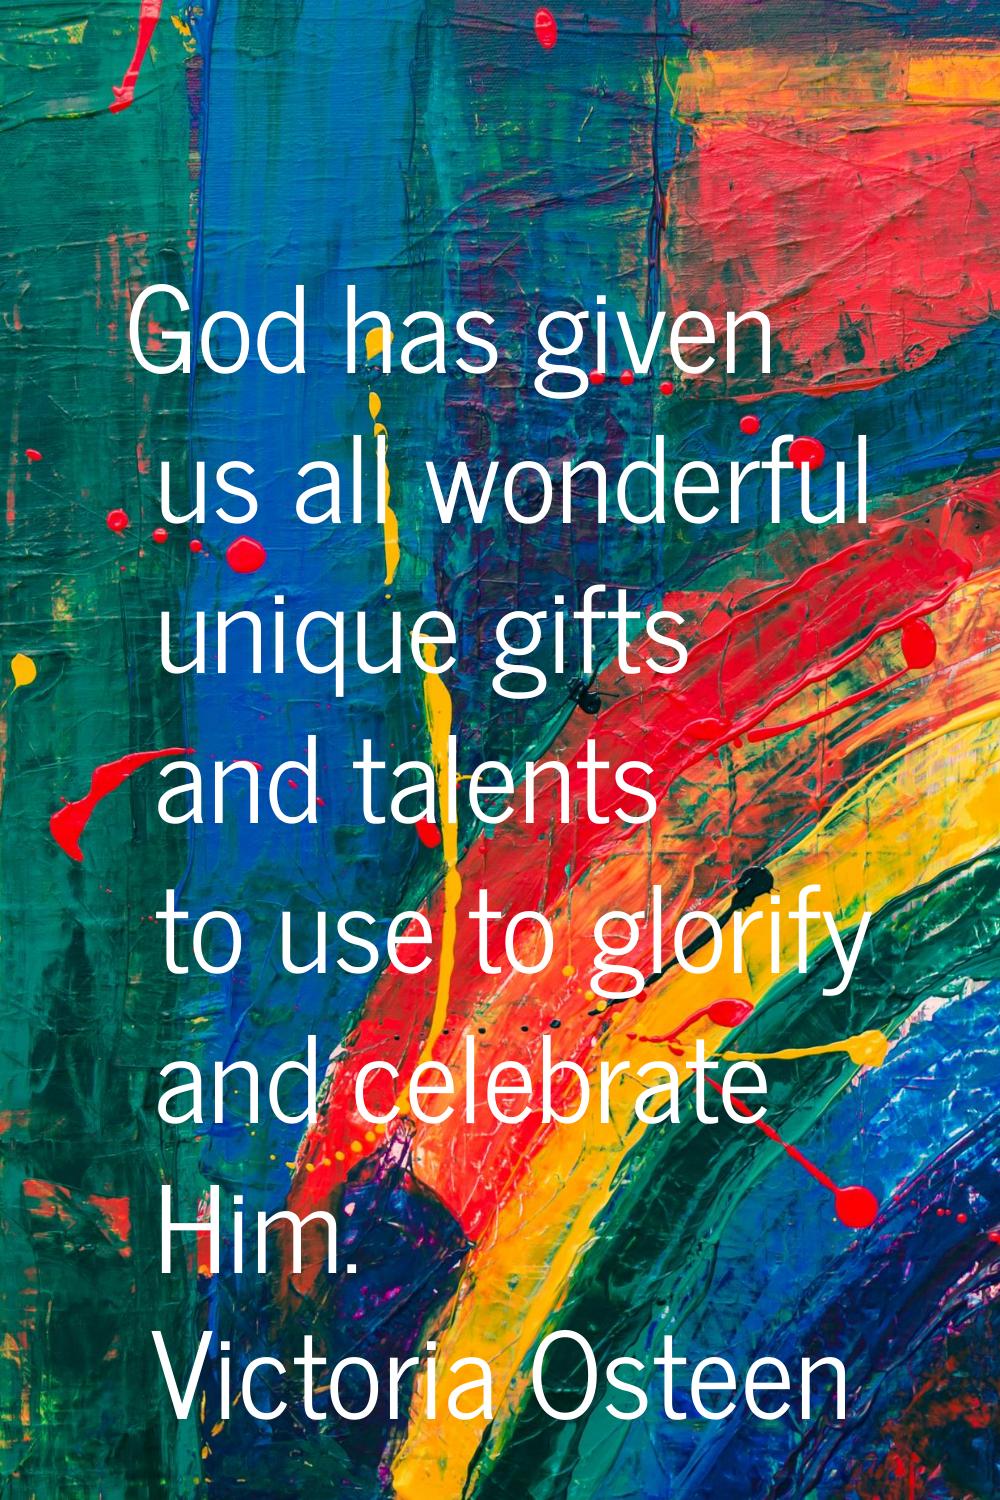 God has given us all wonderful unique gifts and talents to use to glorify and celebrate Him.